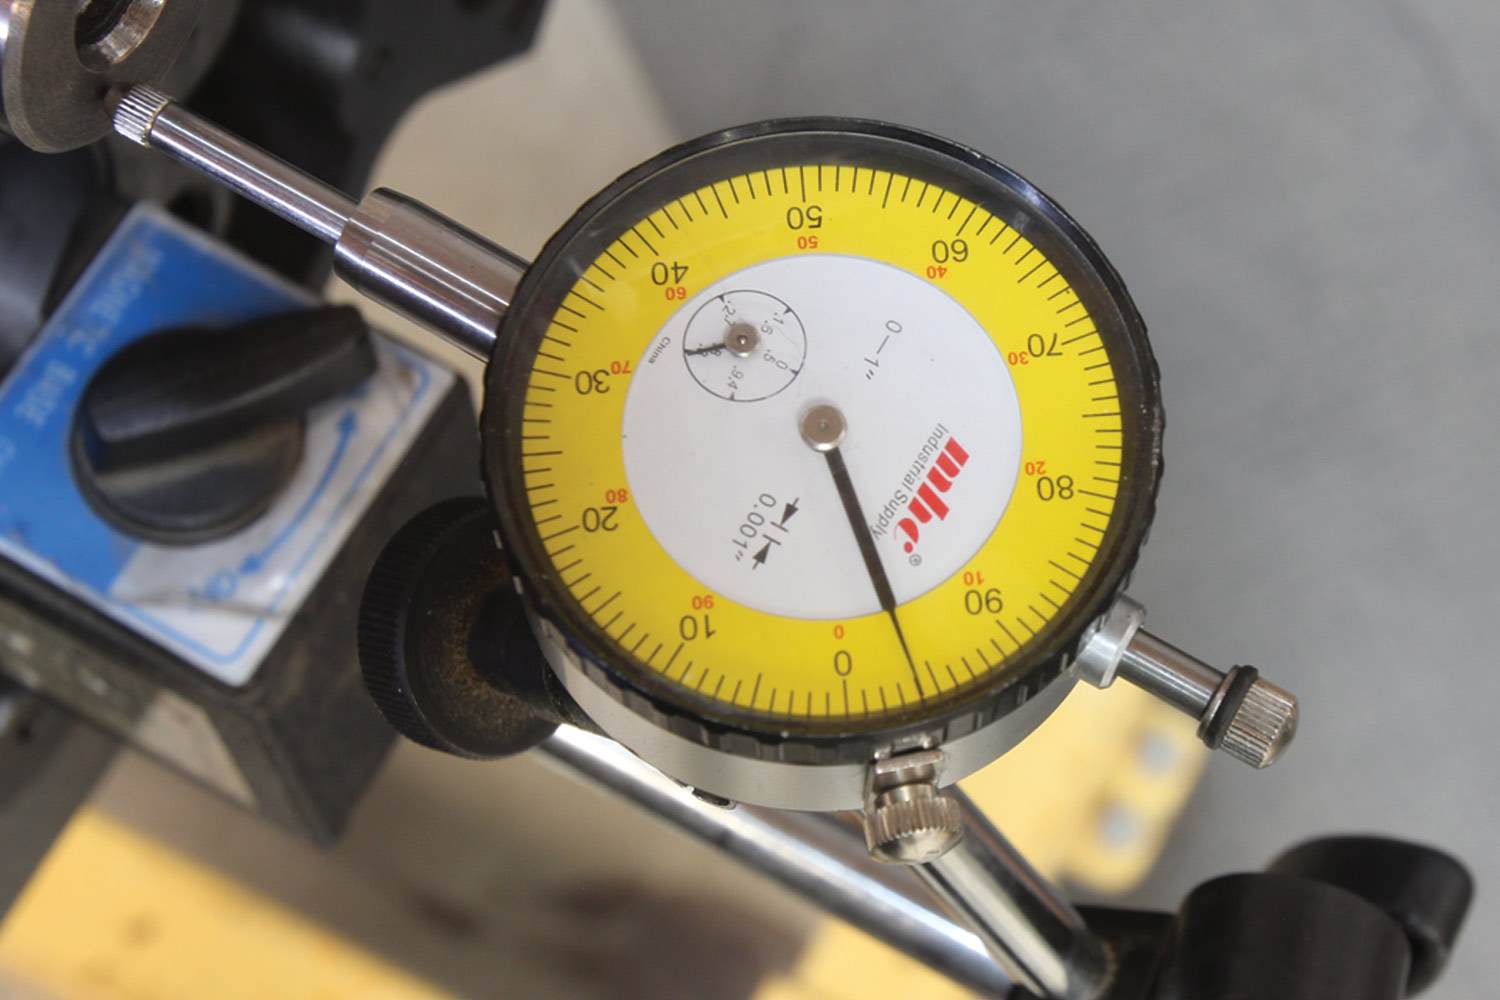 close up of the dial indicator showing the current clearance measurement